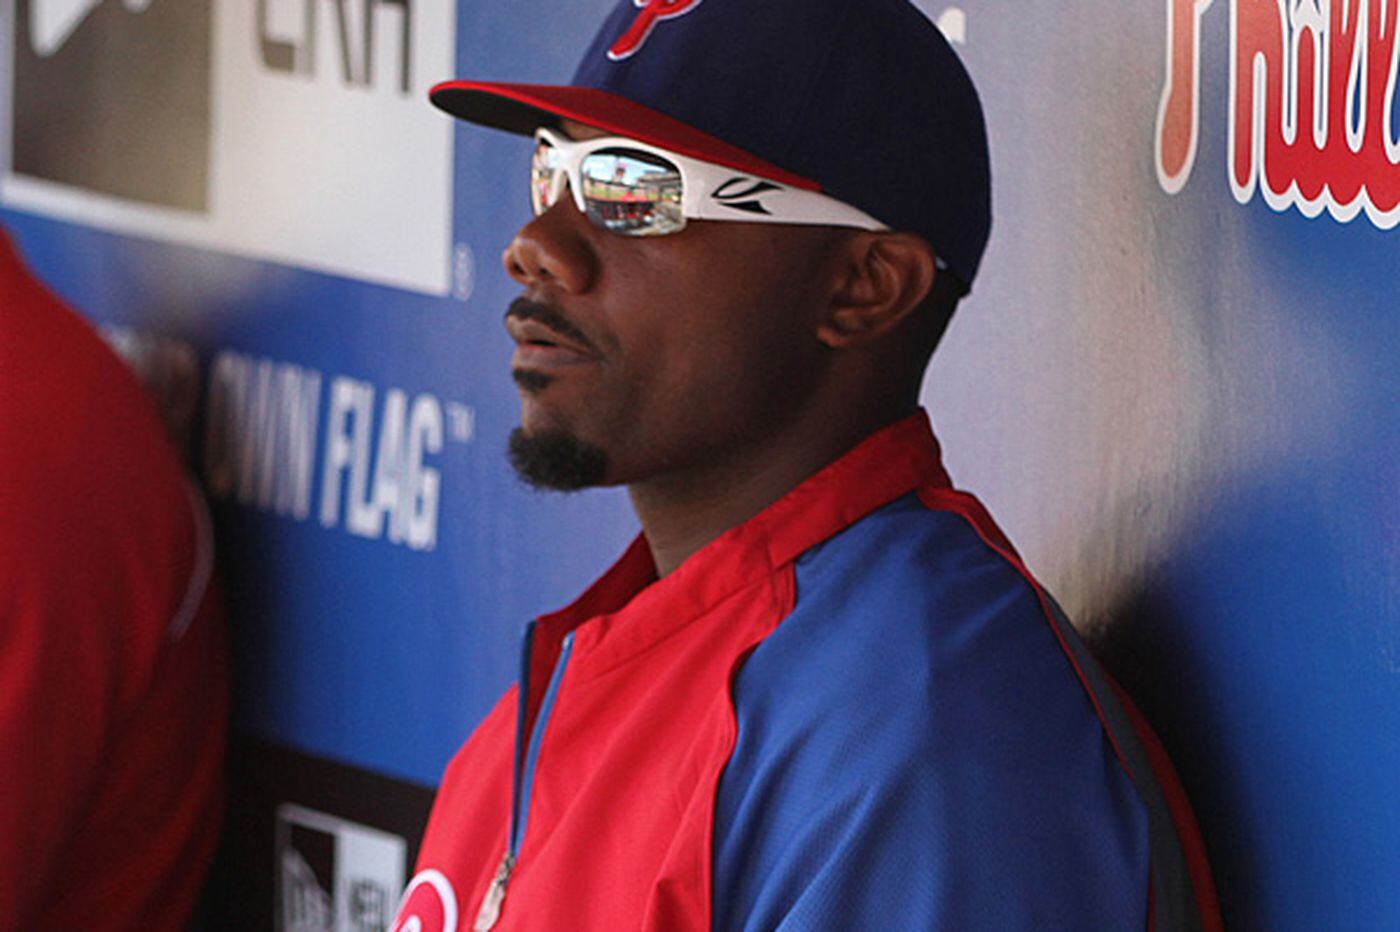 Money issues tear at Ryan Howard and his family